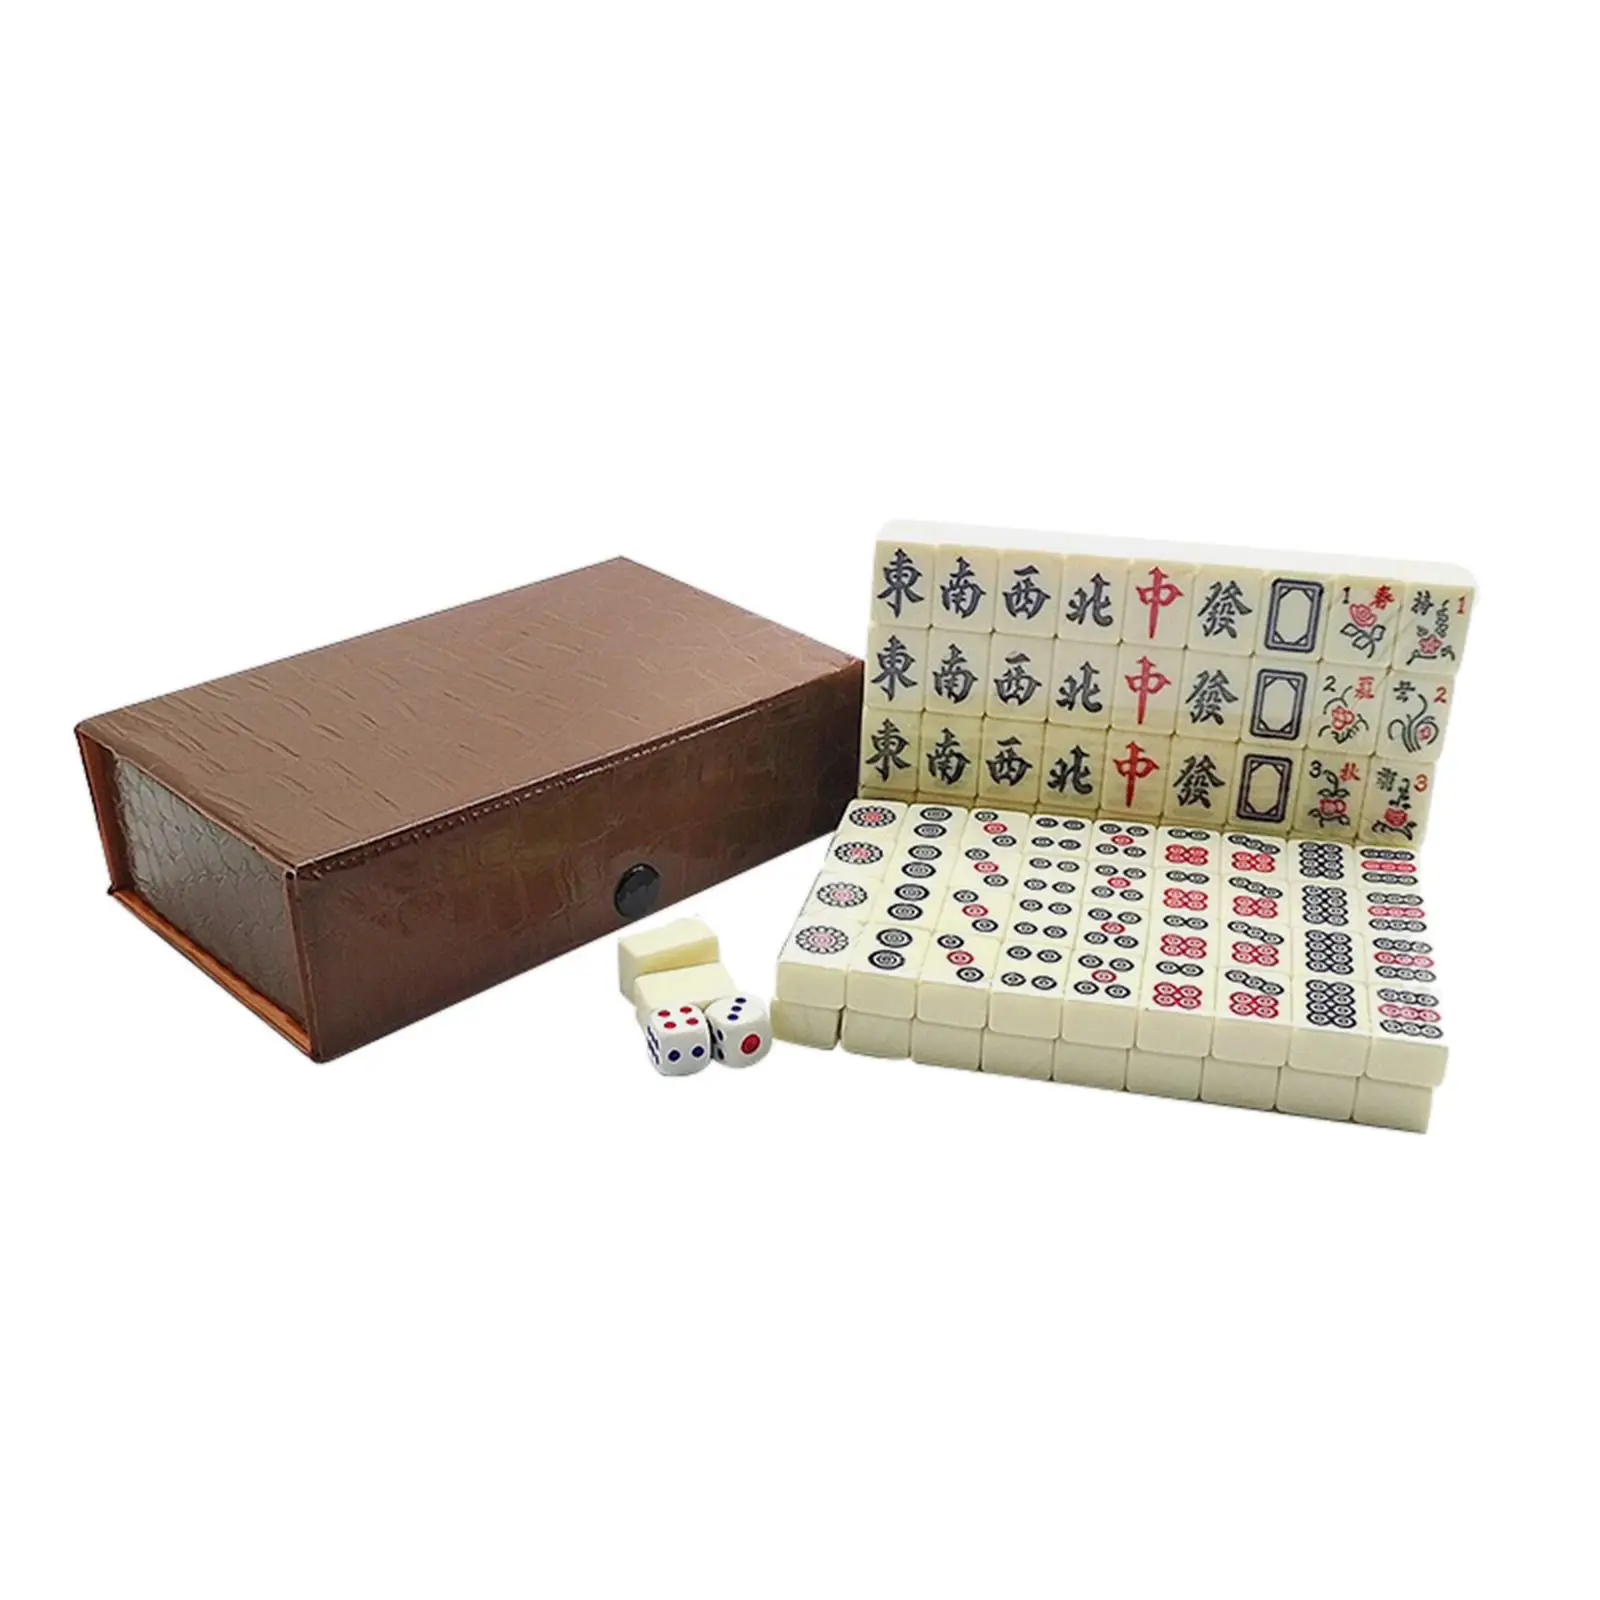 Travel Mahjong Set classic tiles Games with 146 Tiles, for Adults Kids